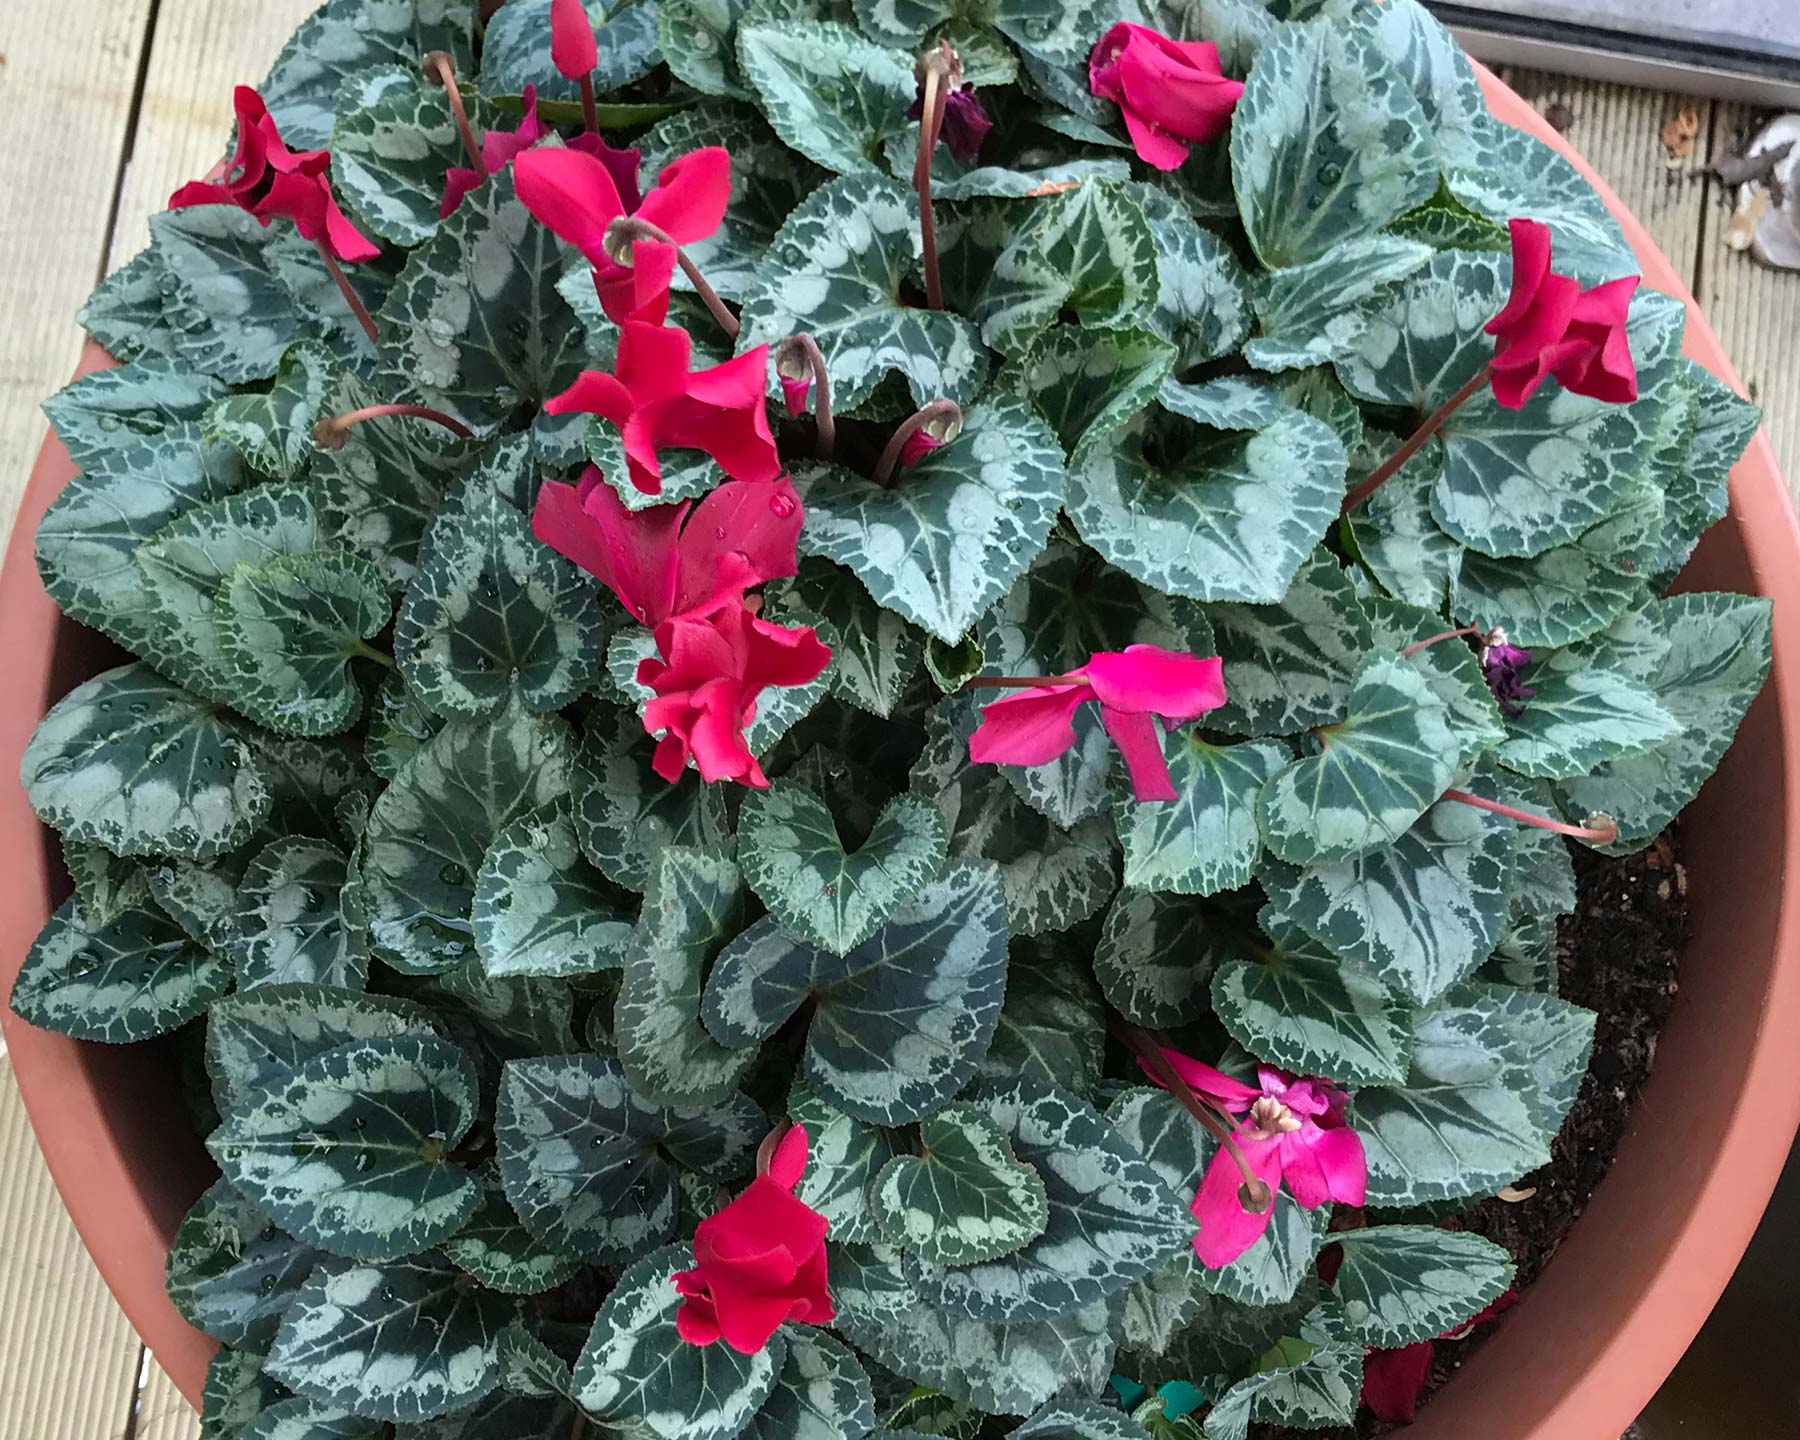 Variegated leaves and brightly coloured flowers make Cyclamen a great pot plant